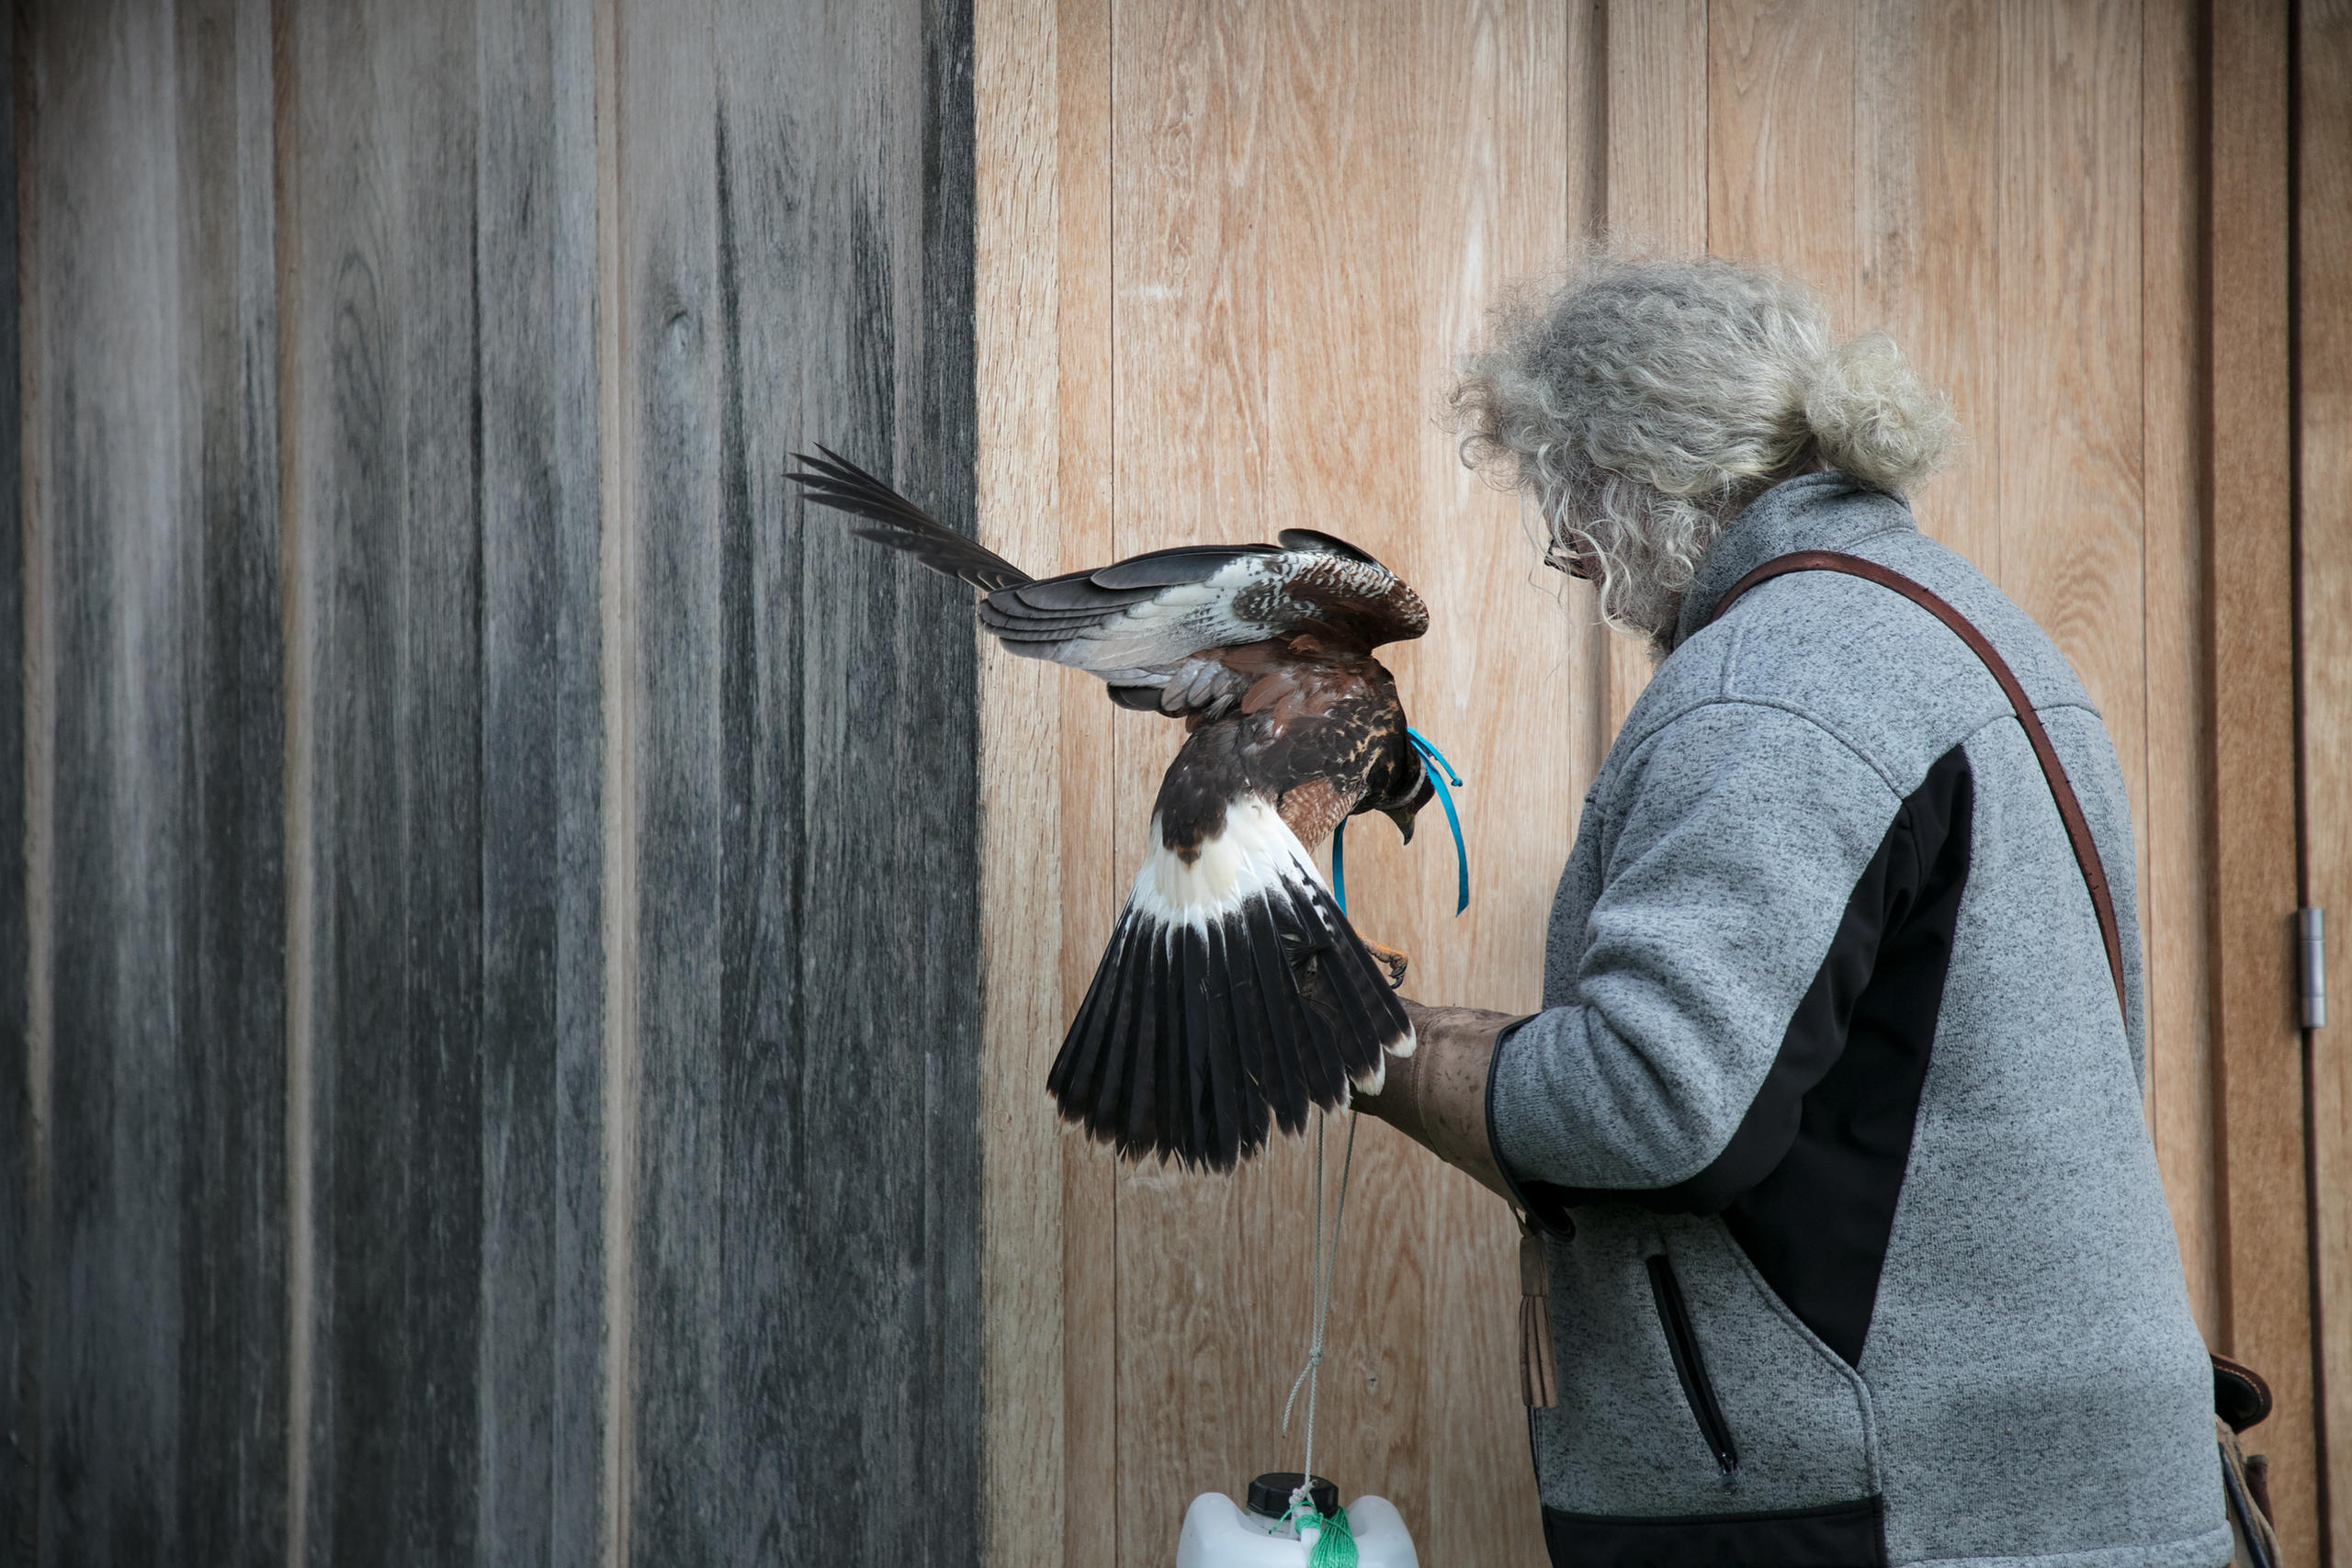 The Harris hawk Aléia is kept attached until she gets used to her environment.